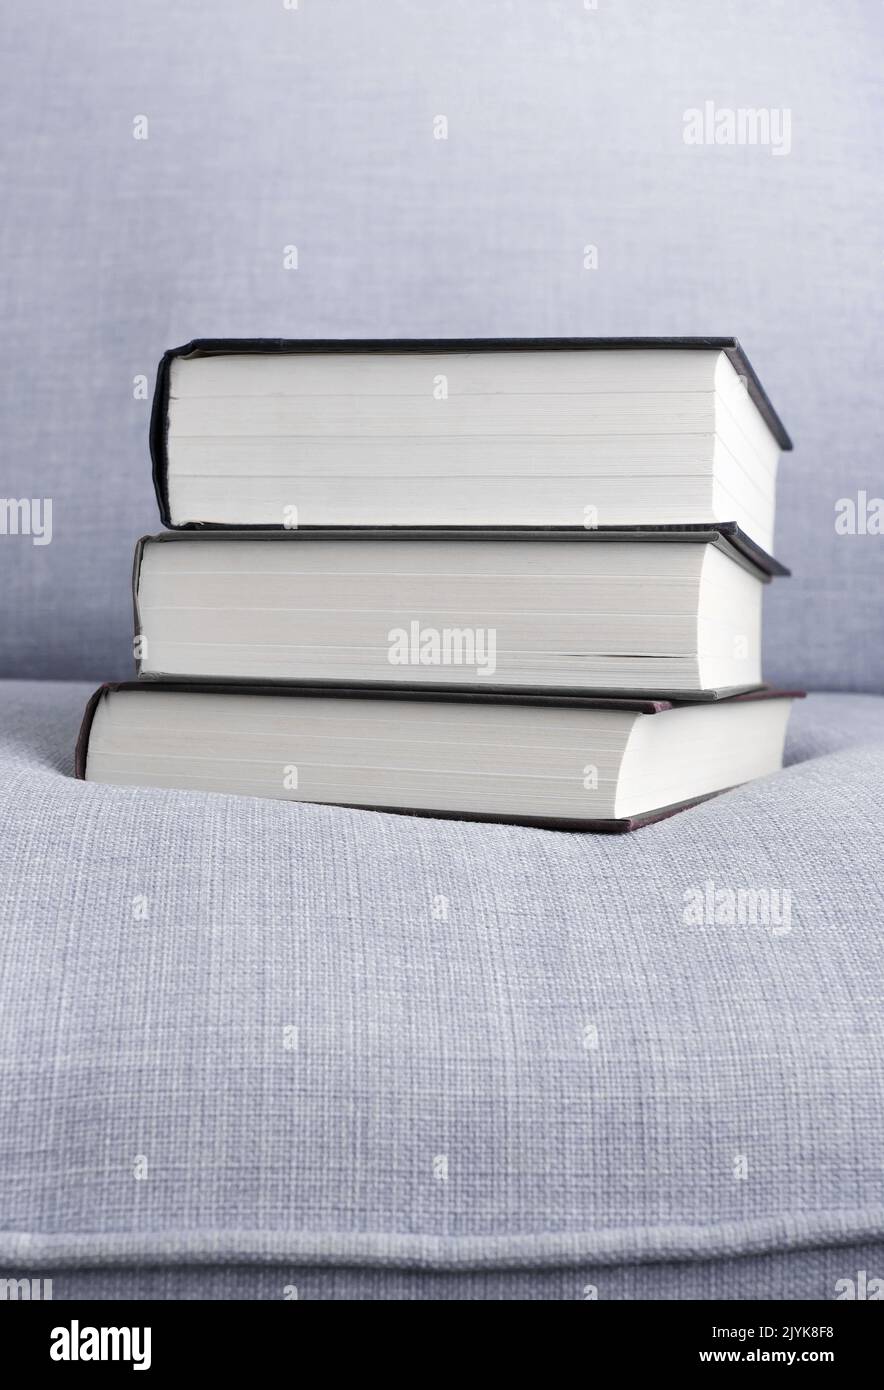 Pile of three hardback books on settee Copy space at top and bottom Stock Photo